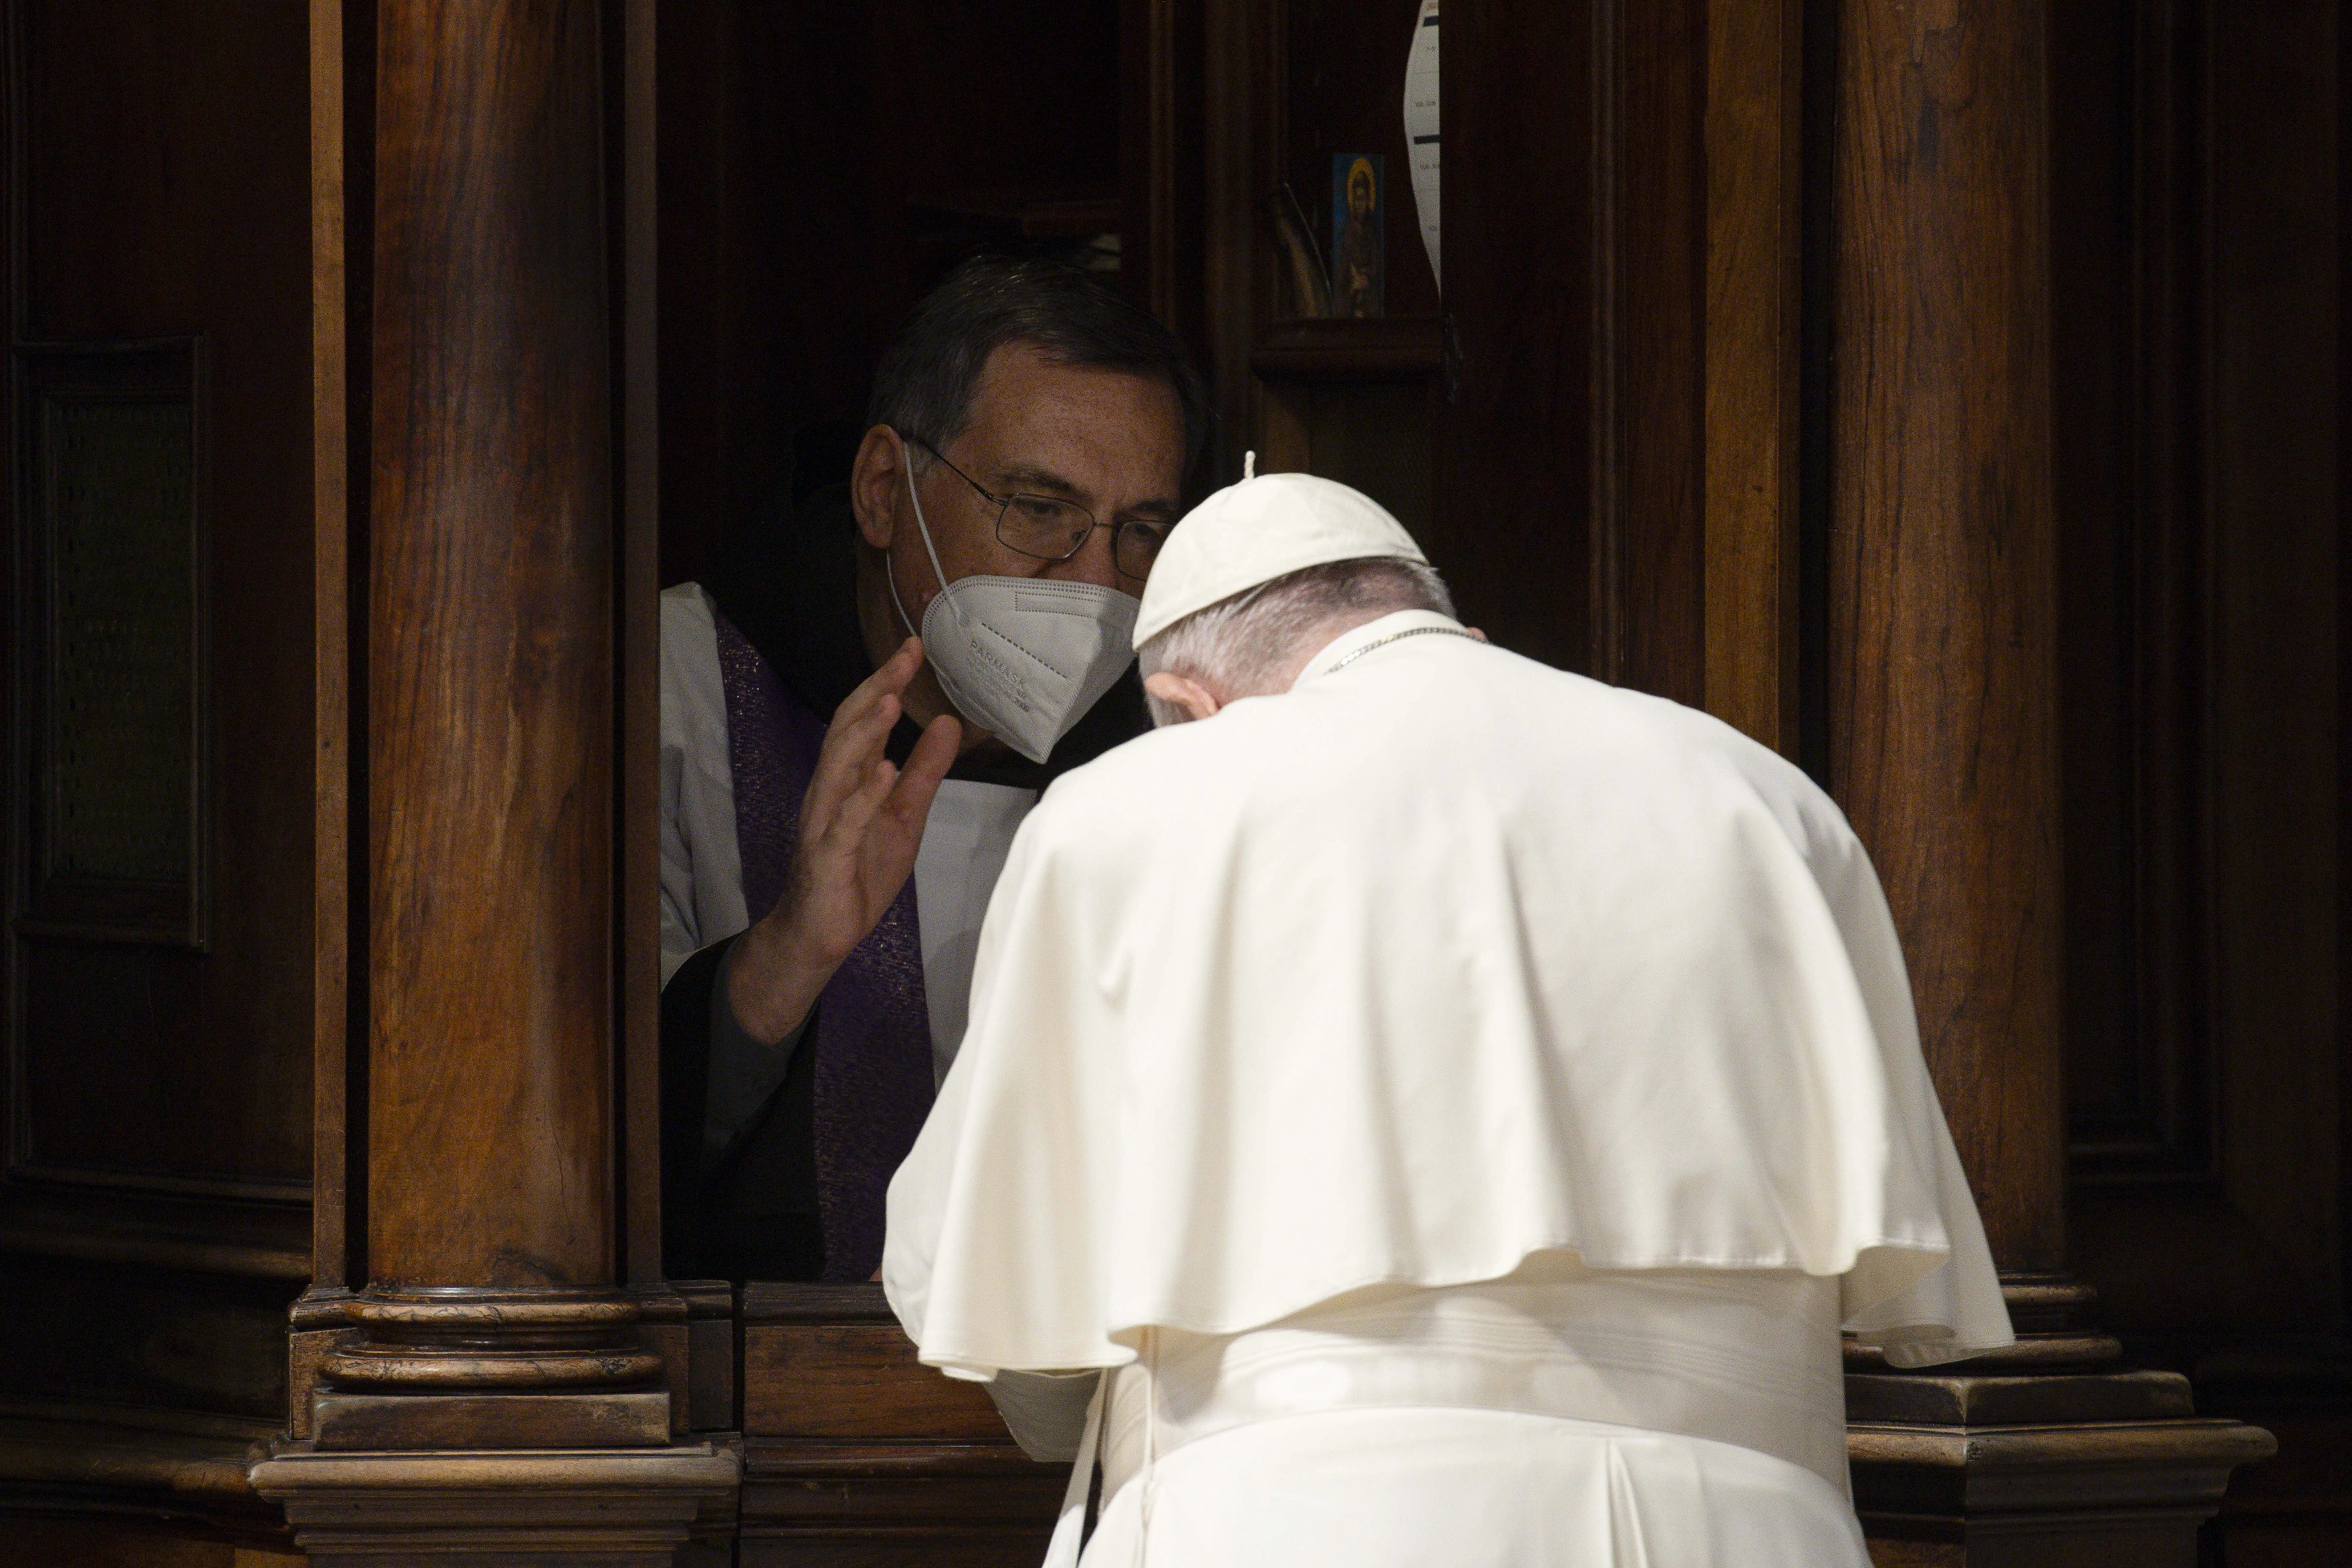 Pope Francis goes to confession during a penance service in St. Peter's Basilica on March 25, 2022.?w=200&h=150